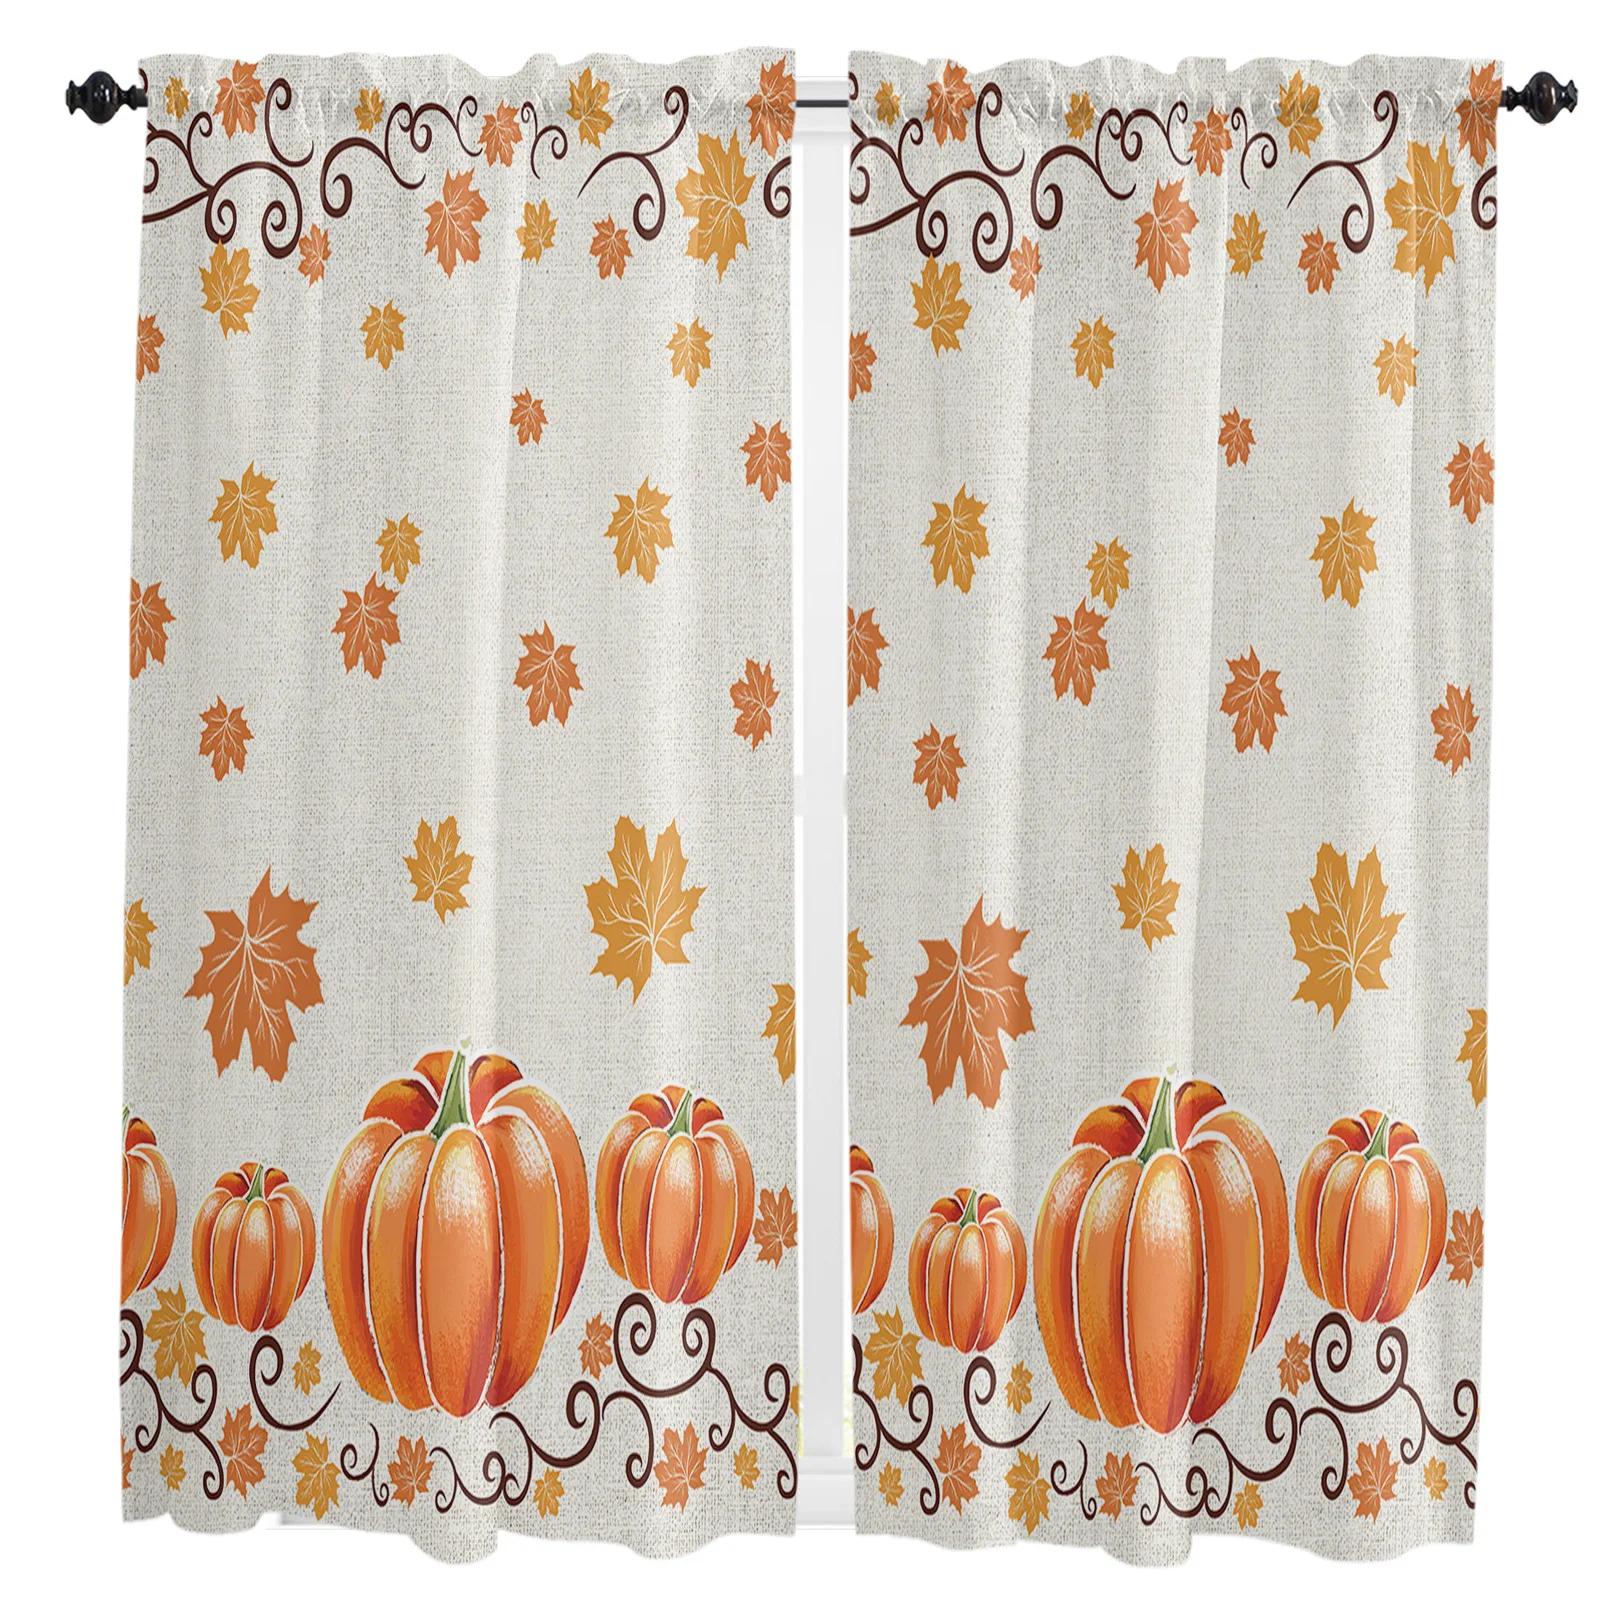 Autumn Thanksgiving Maple Leaf Retro Living Room The Bedroom Home Interior Room Decoration Drapes Kitchen Curtains